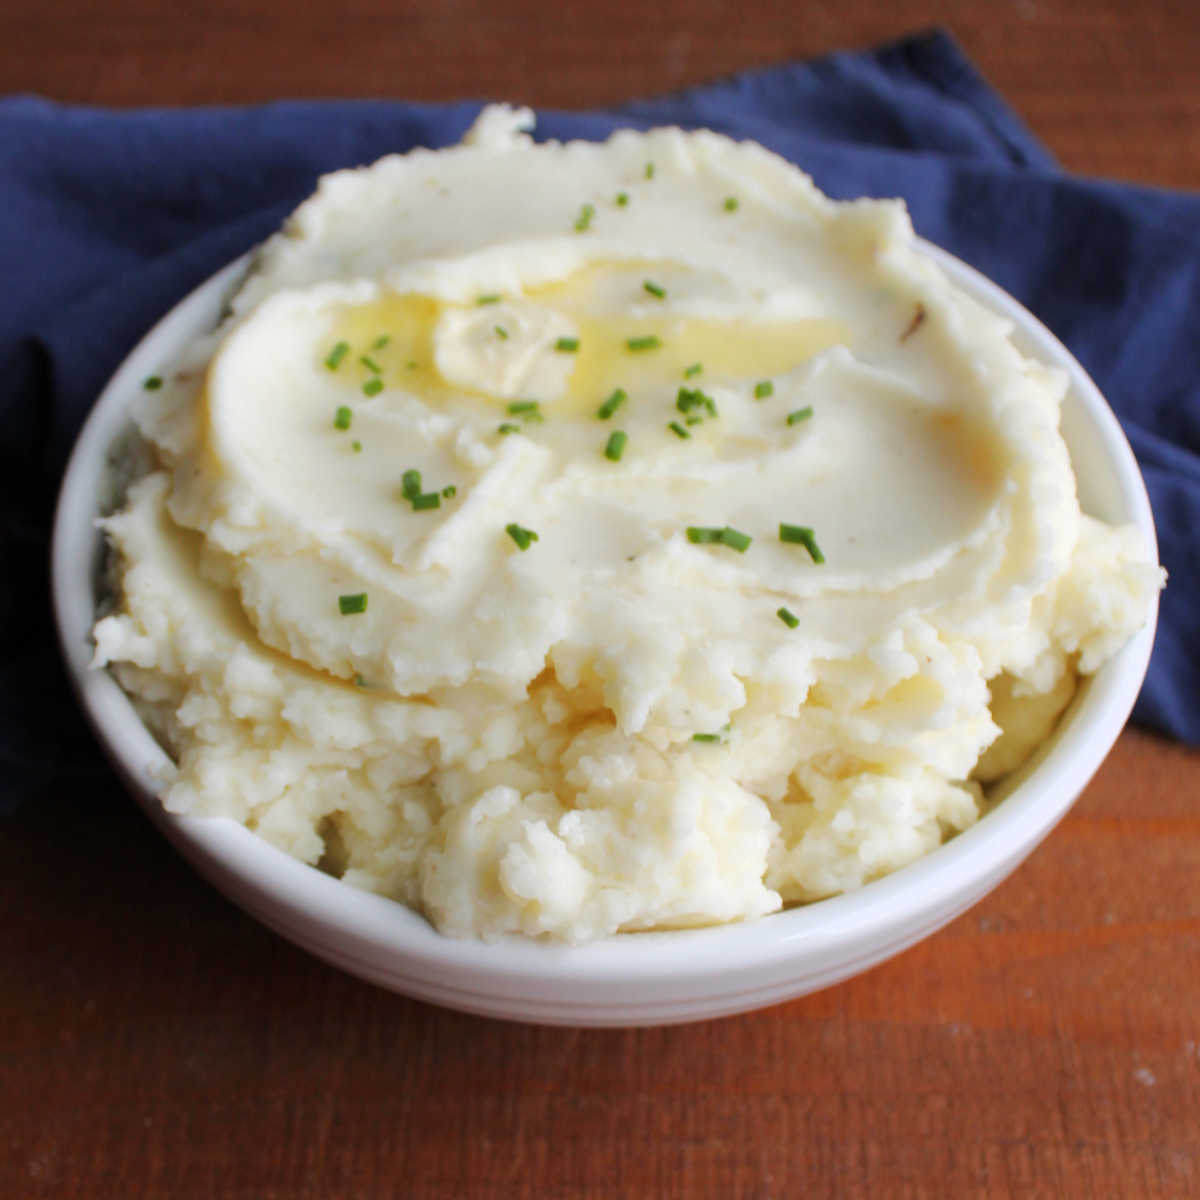 Serving bowl filled with cream sour cream and chive mashed potatoes topped with extra melted butter and bits of fresh green chive.